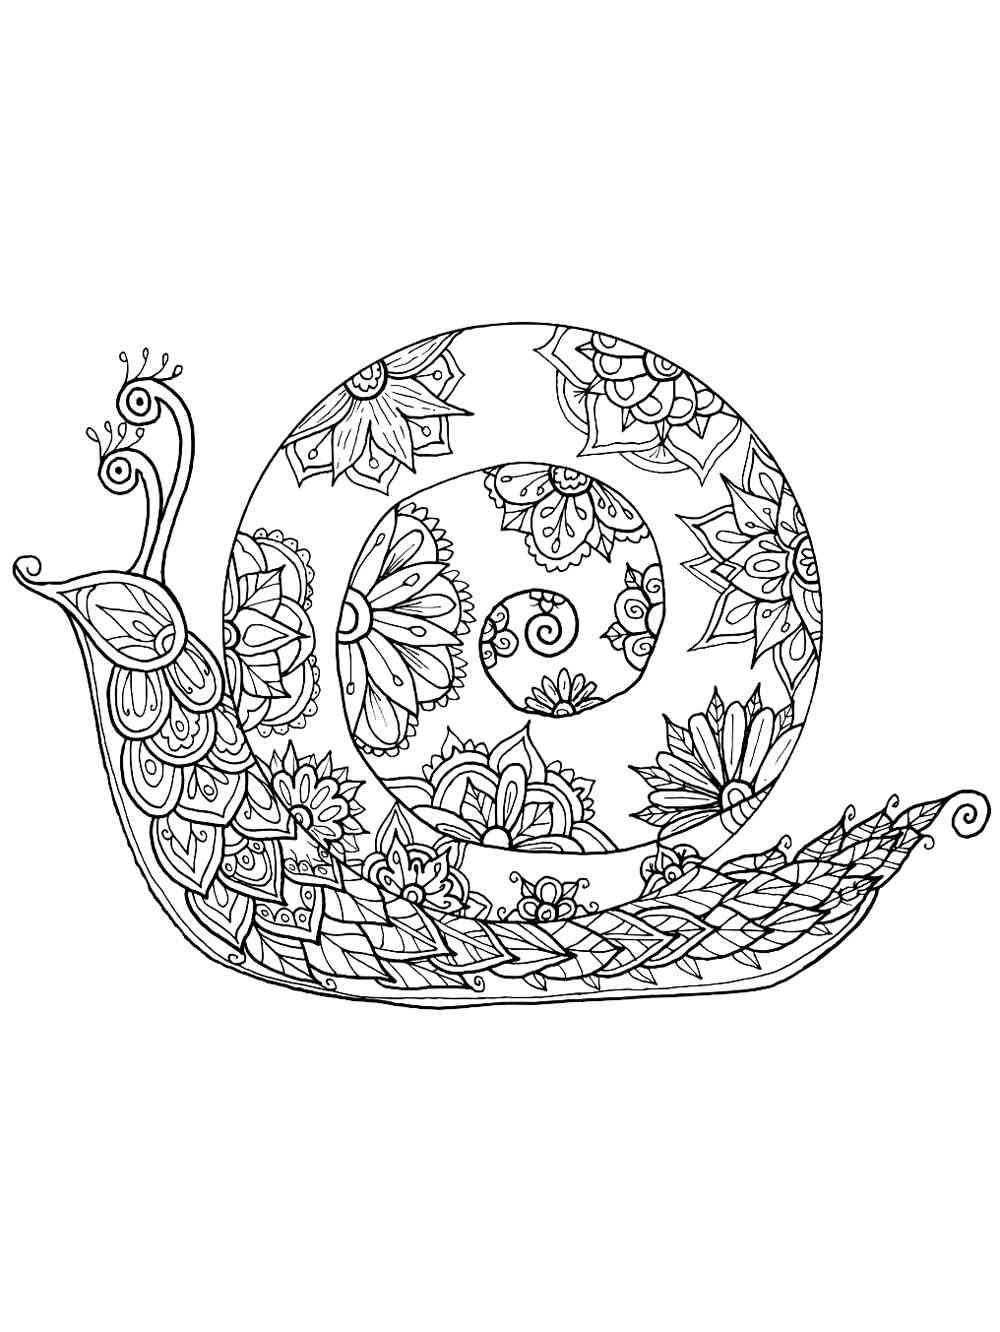 Snail with Patterns coloring page